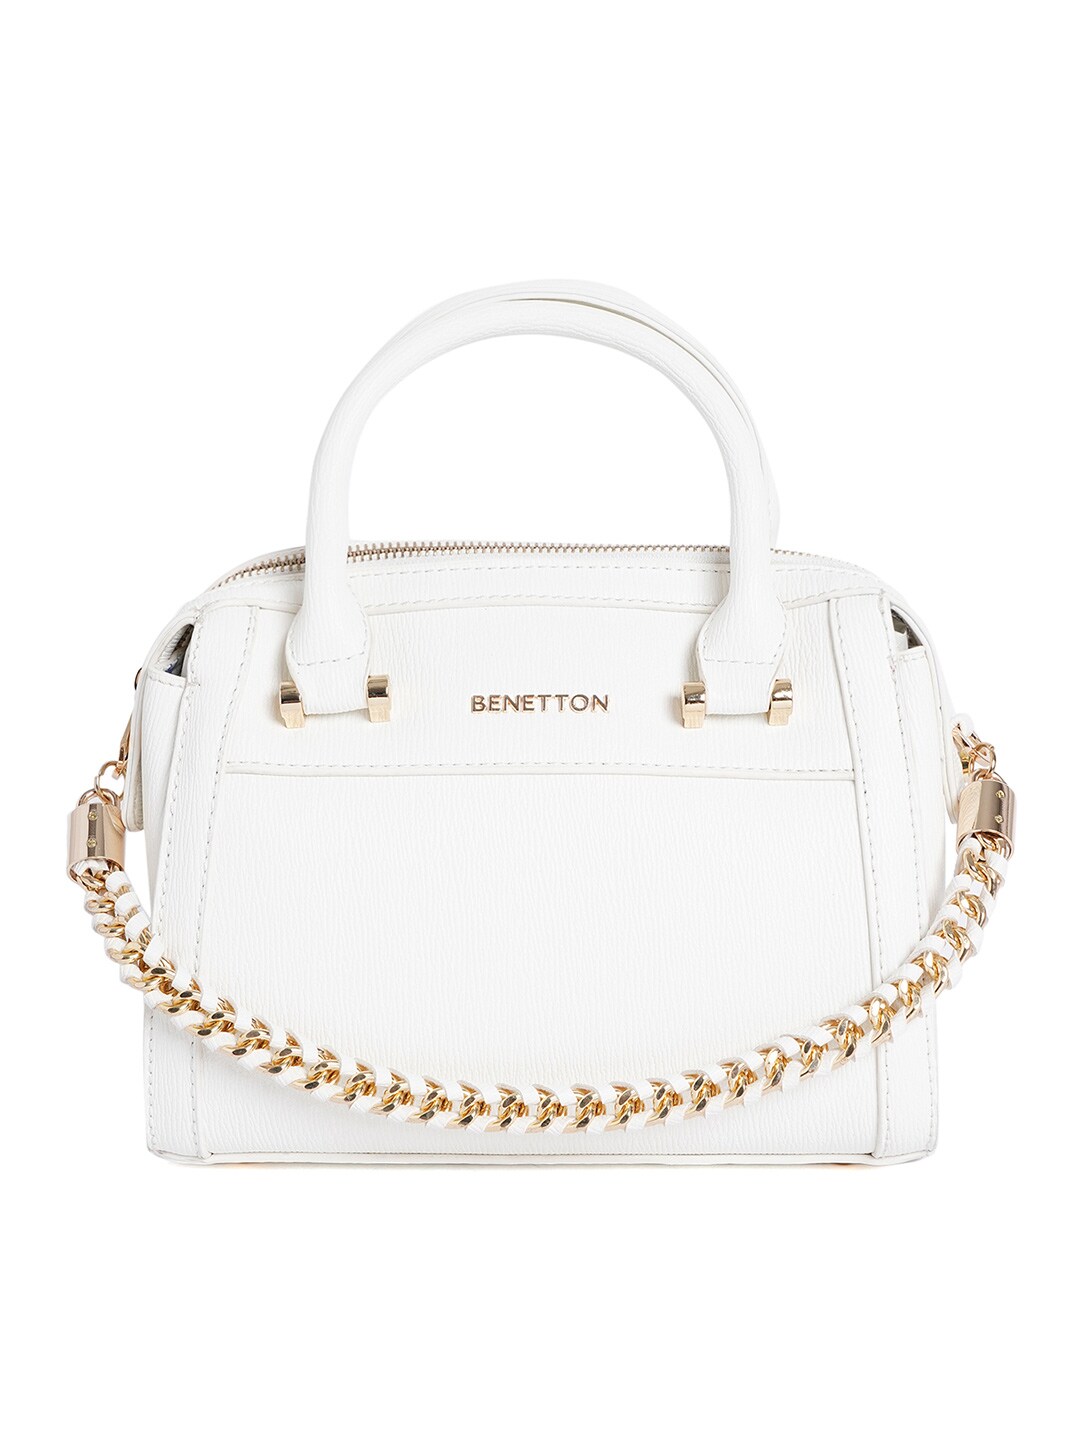 United Colors of Benetton White Handheld Bag Price in India